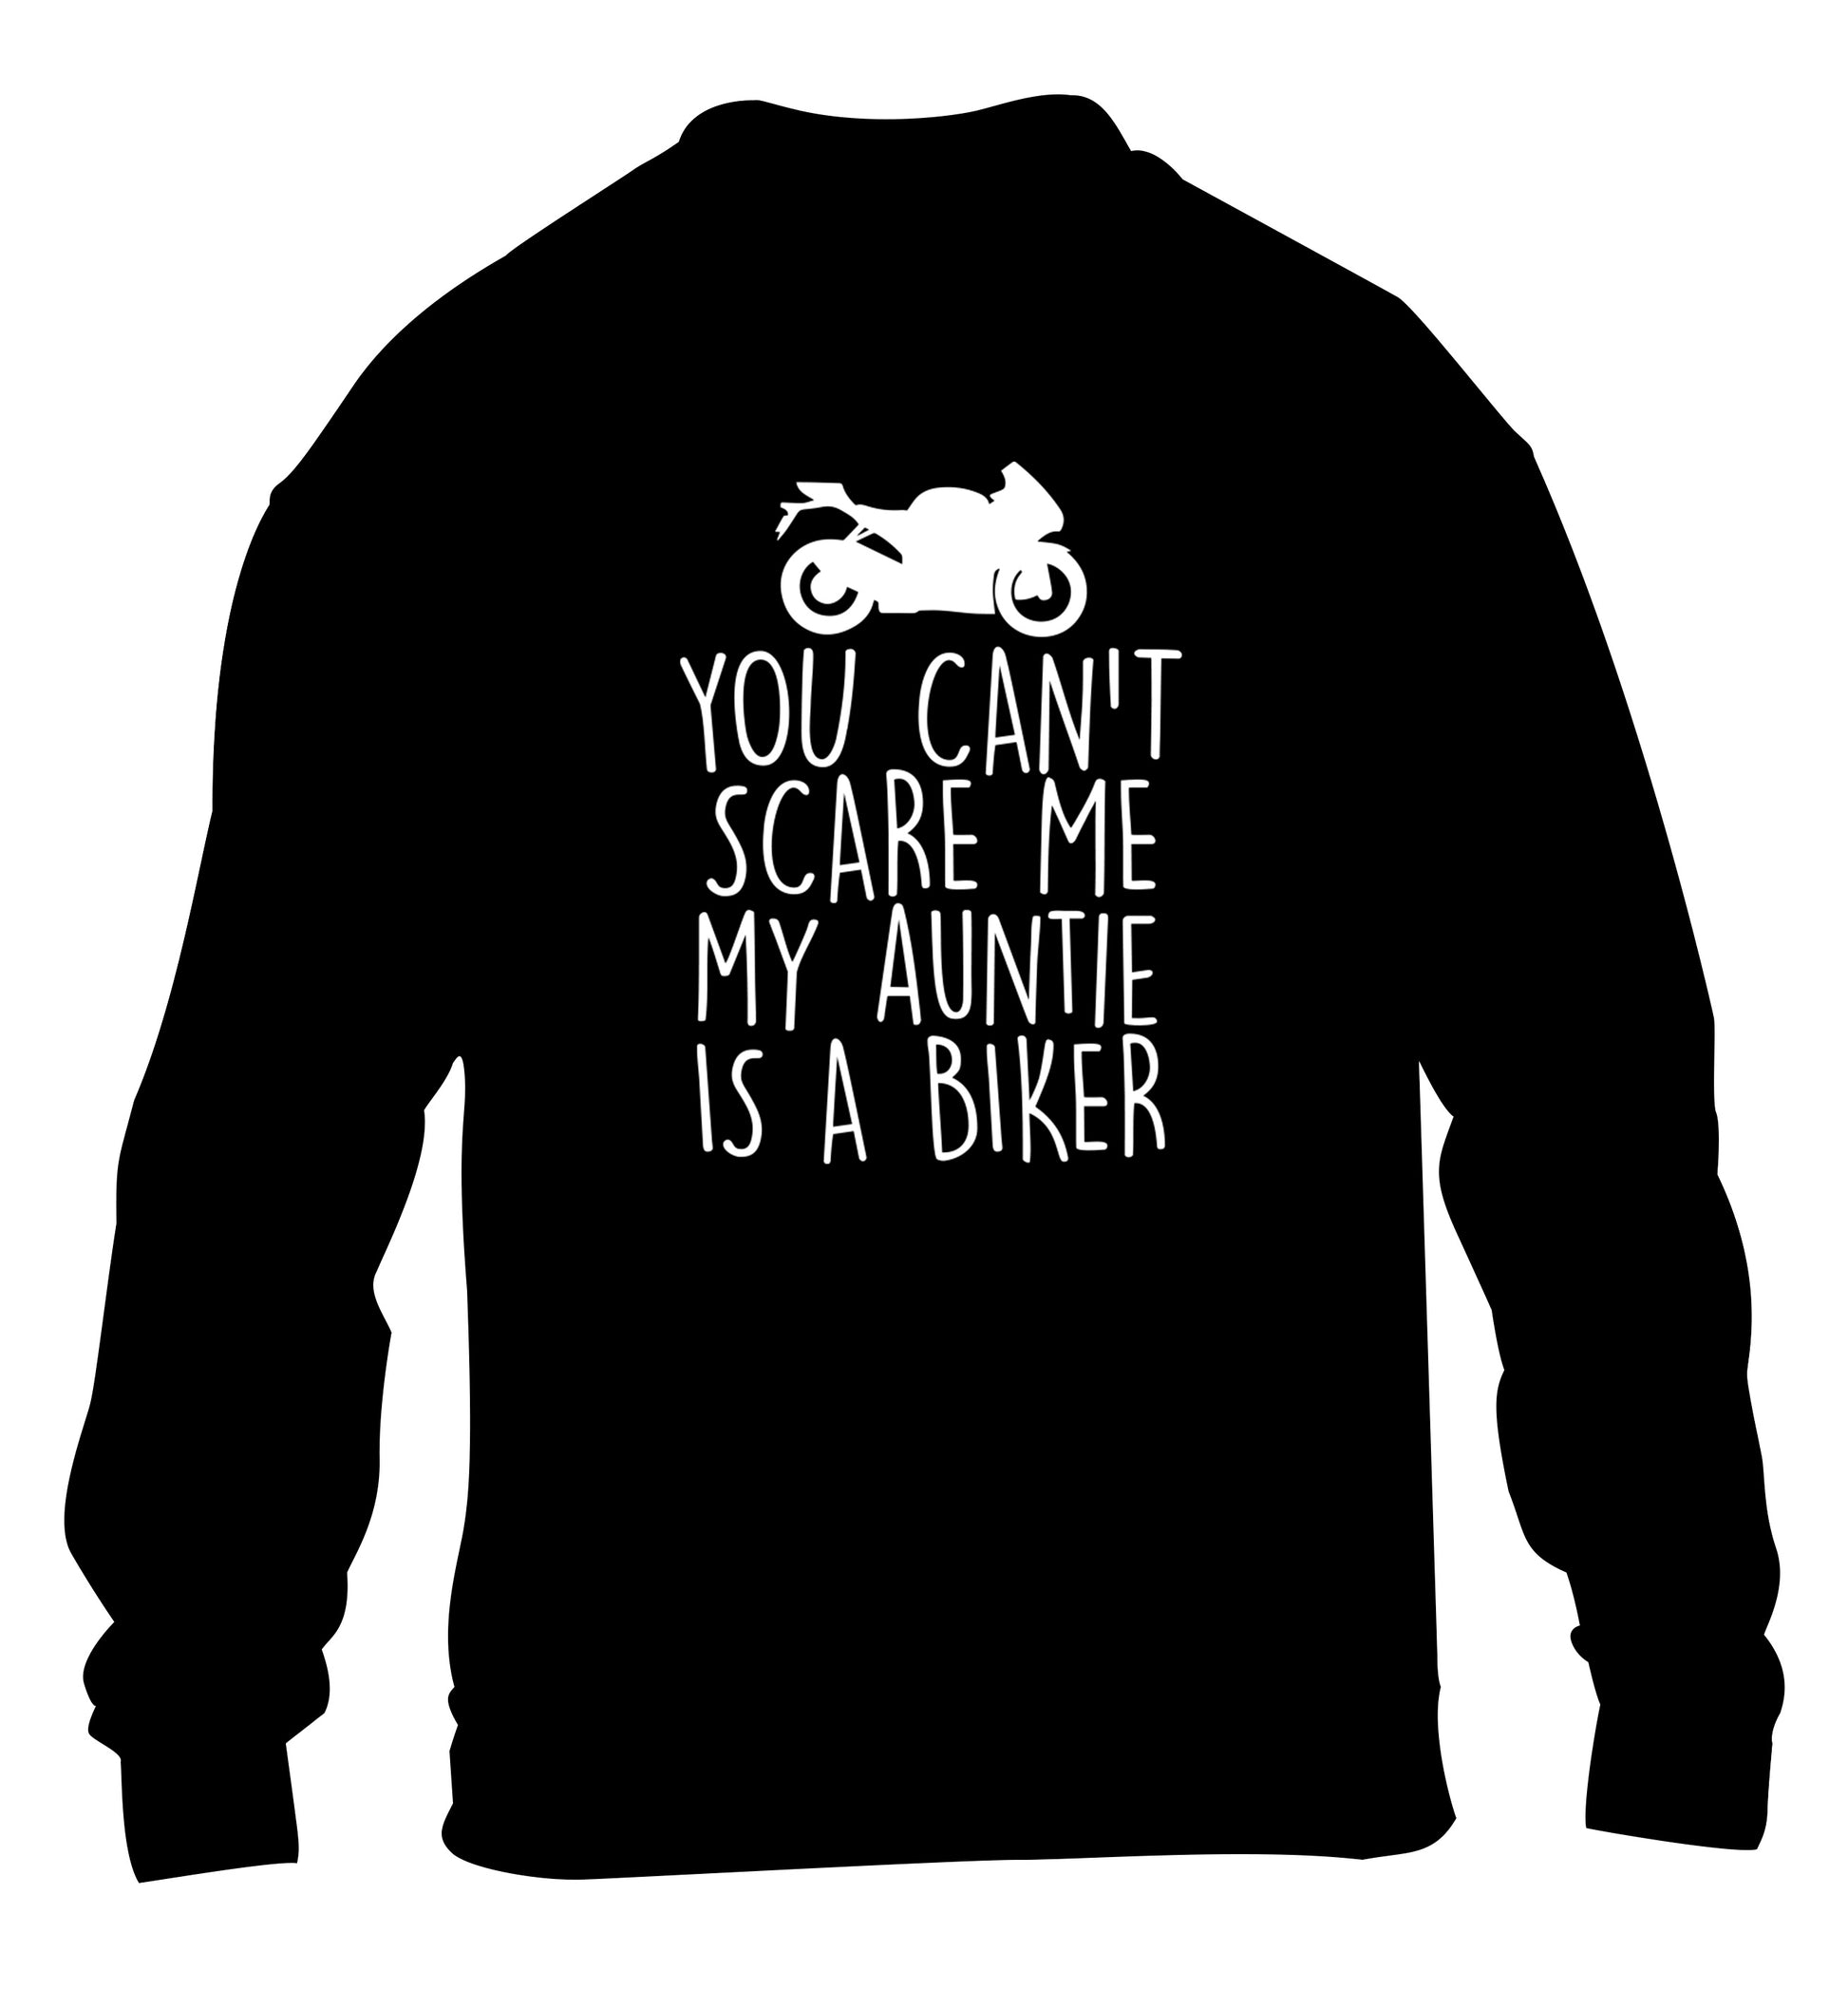 You can't scare me my auntie is a biker children's black sweater 12-13 Years